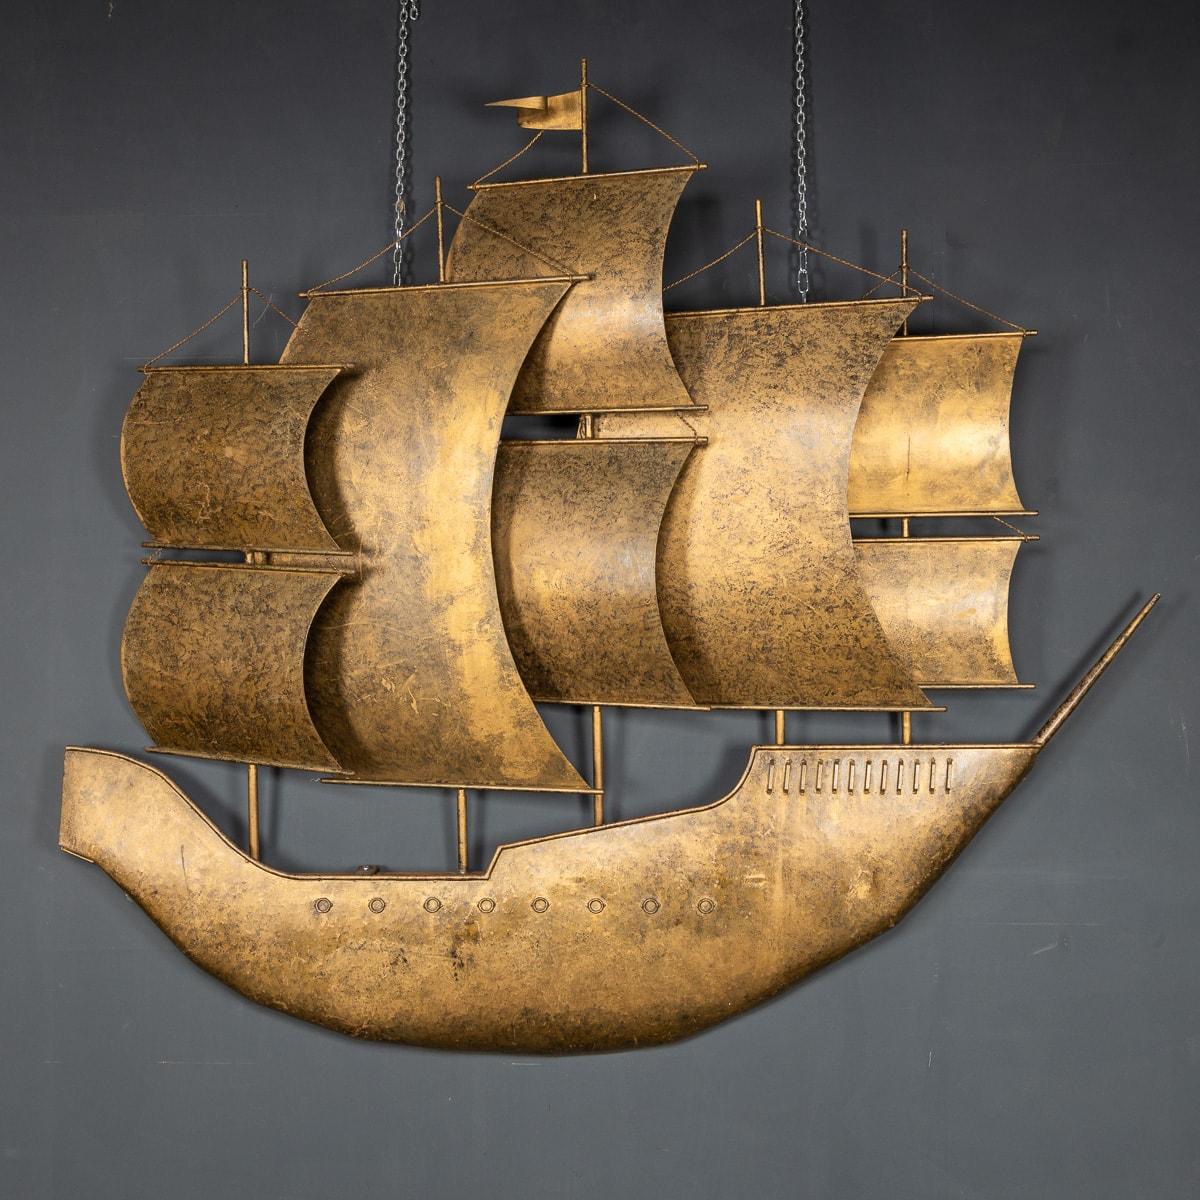 Stunning 20th century large piece of wall art in a shape of a galleon with full blown sails in gilded metal. A superb piece of decorative art that will look great in any interior.

Condition
In great condition - No Damage.

Size
Height: